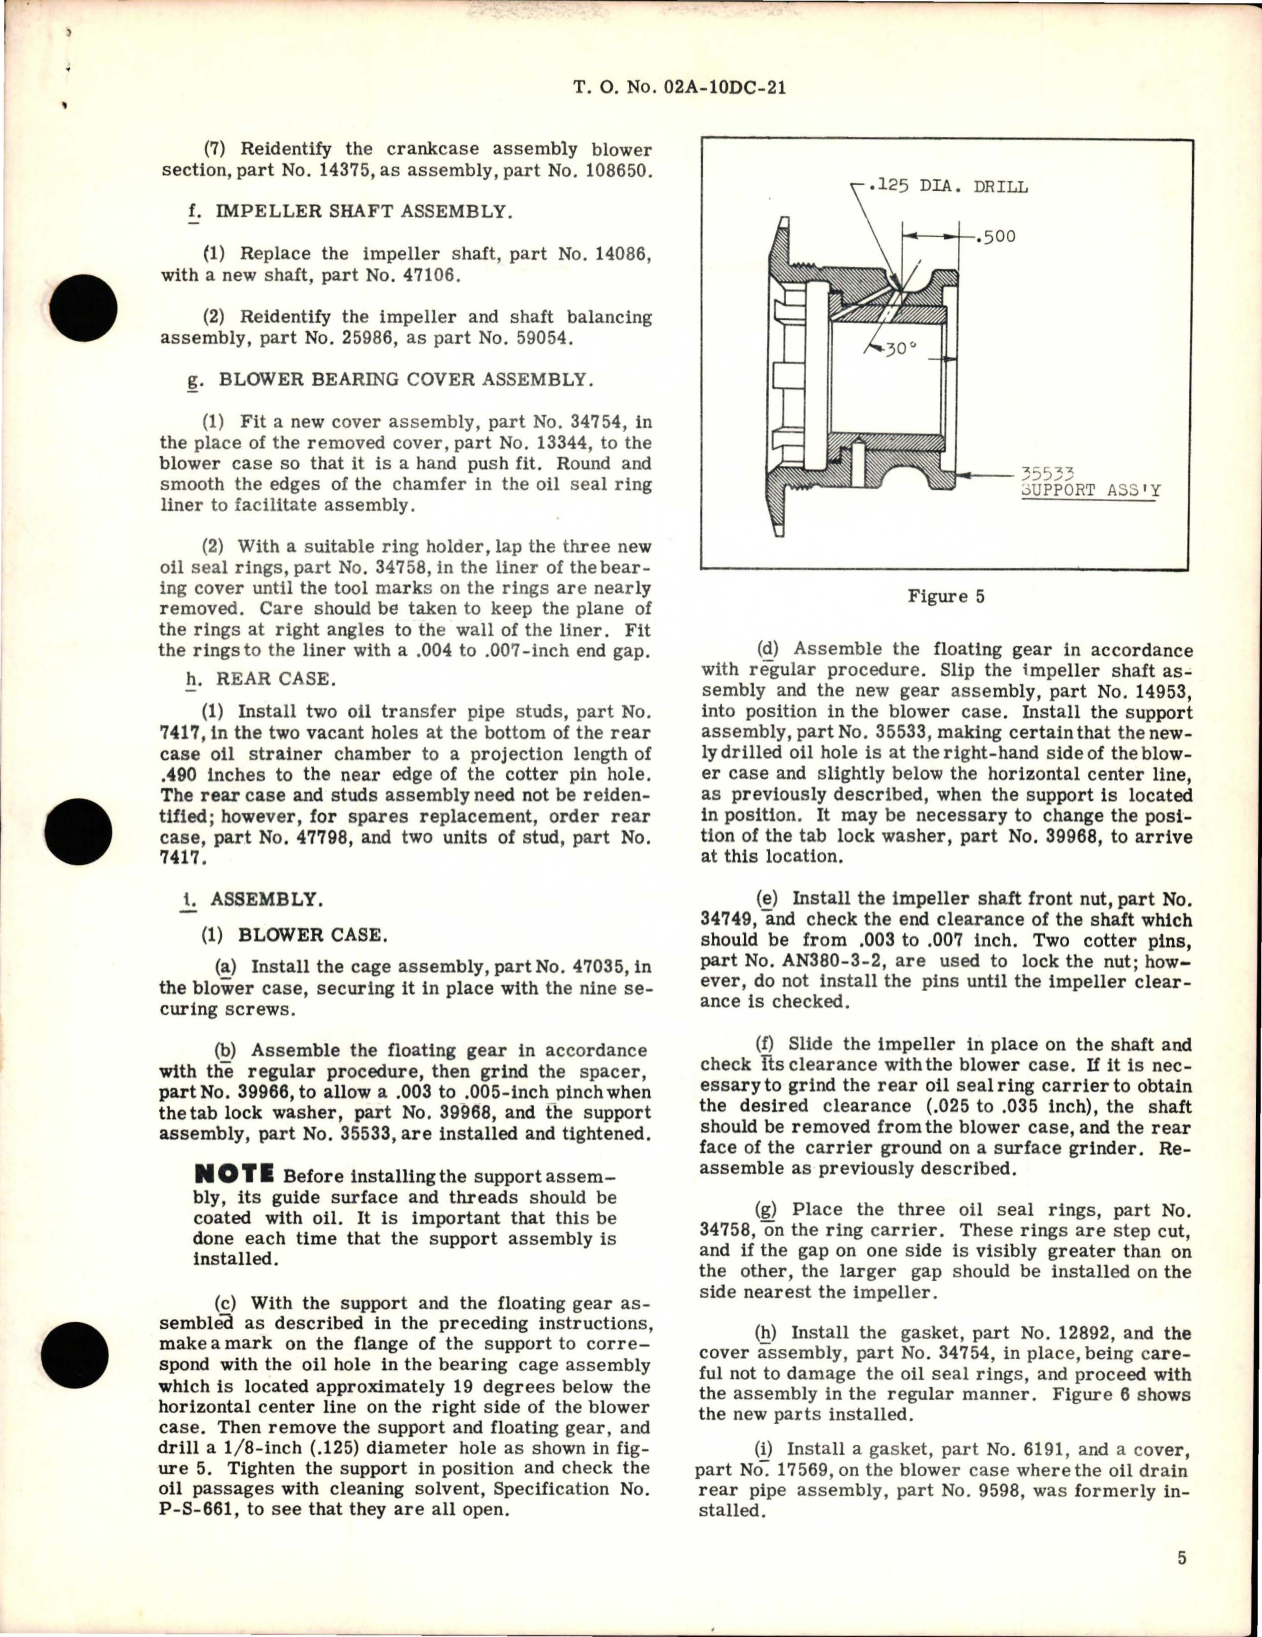 Sample page 5 from AirCorps Library document: Conversion of R-1340-AN-1 to R-1340-57 